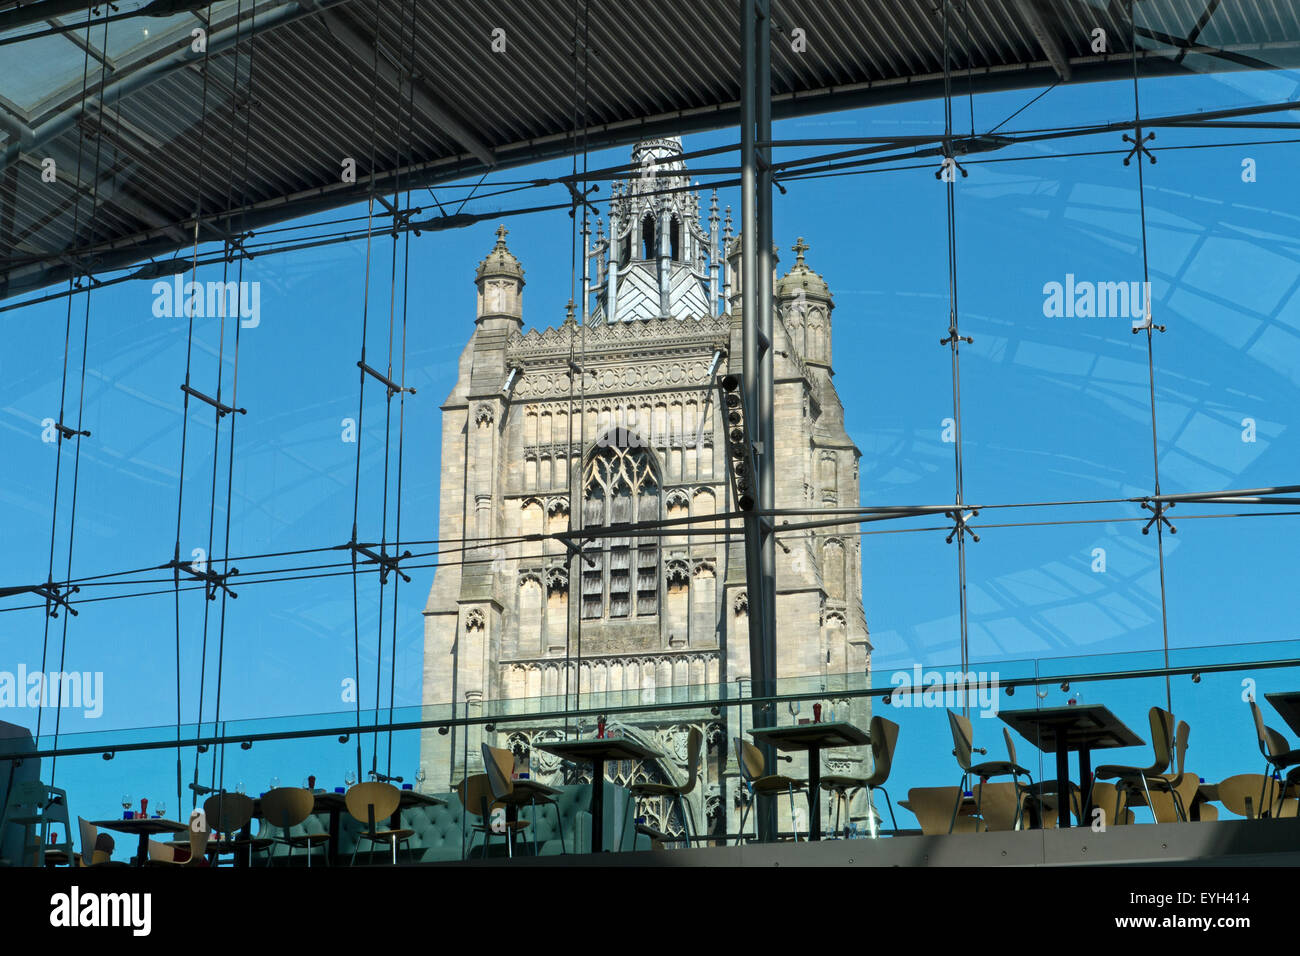 The Medieval Parish Church of St Peter Mancroft in Norwich, viewed from The Forum, Norwich, Norfolk, England Stock Photo